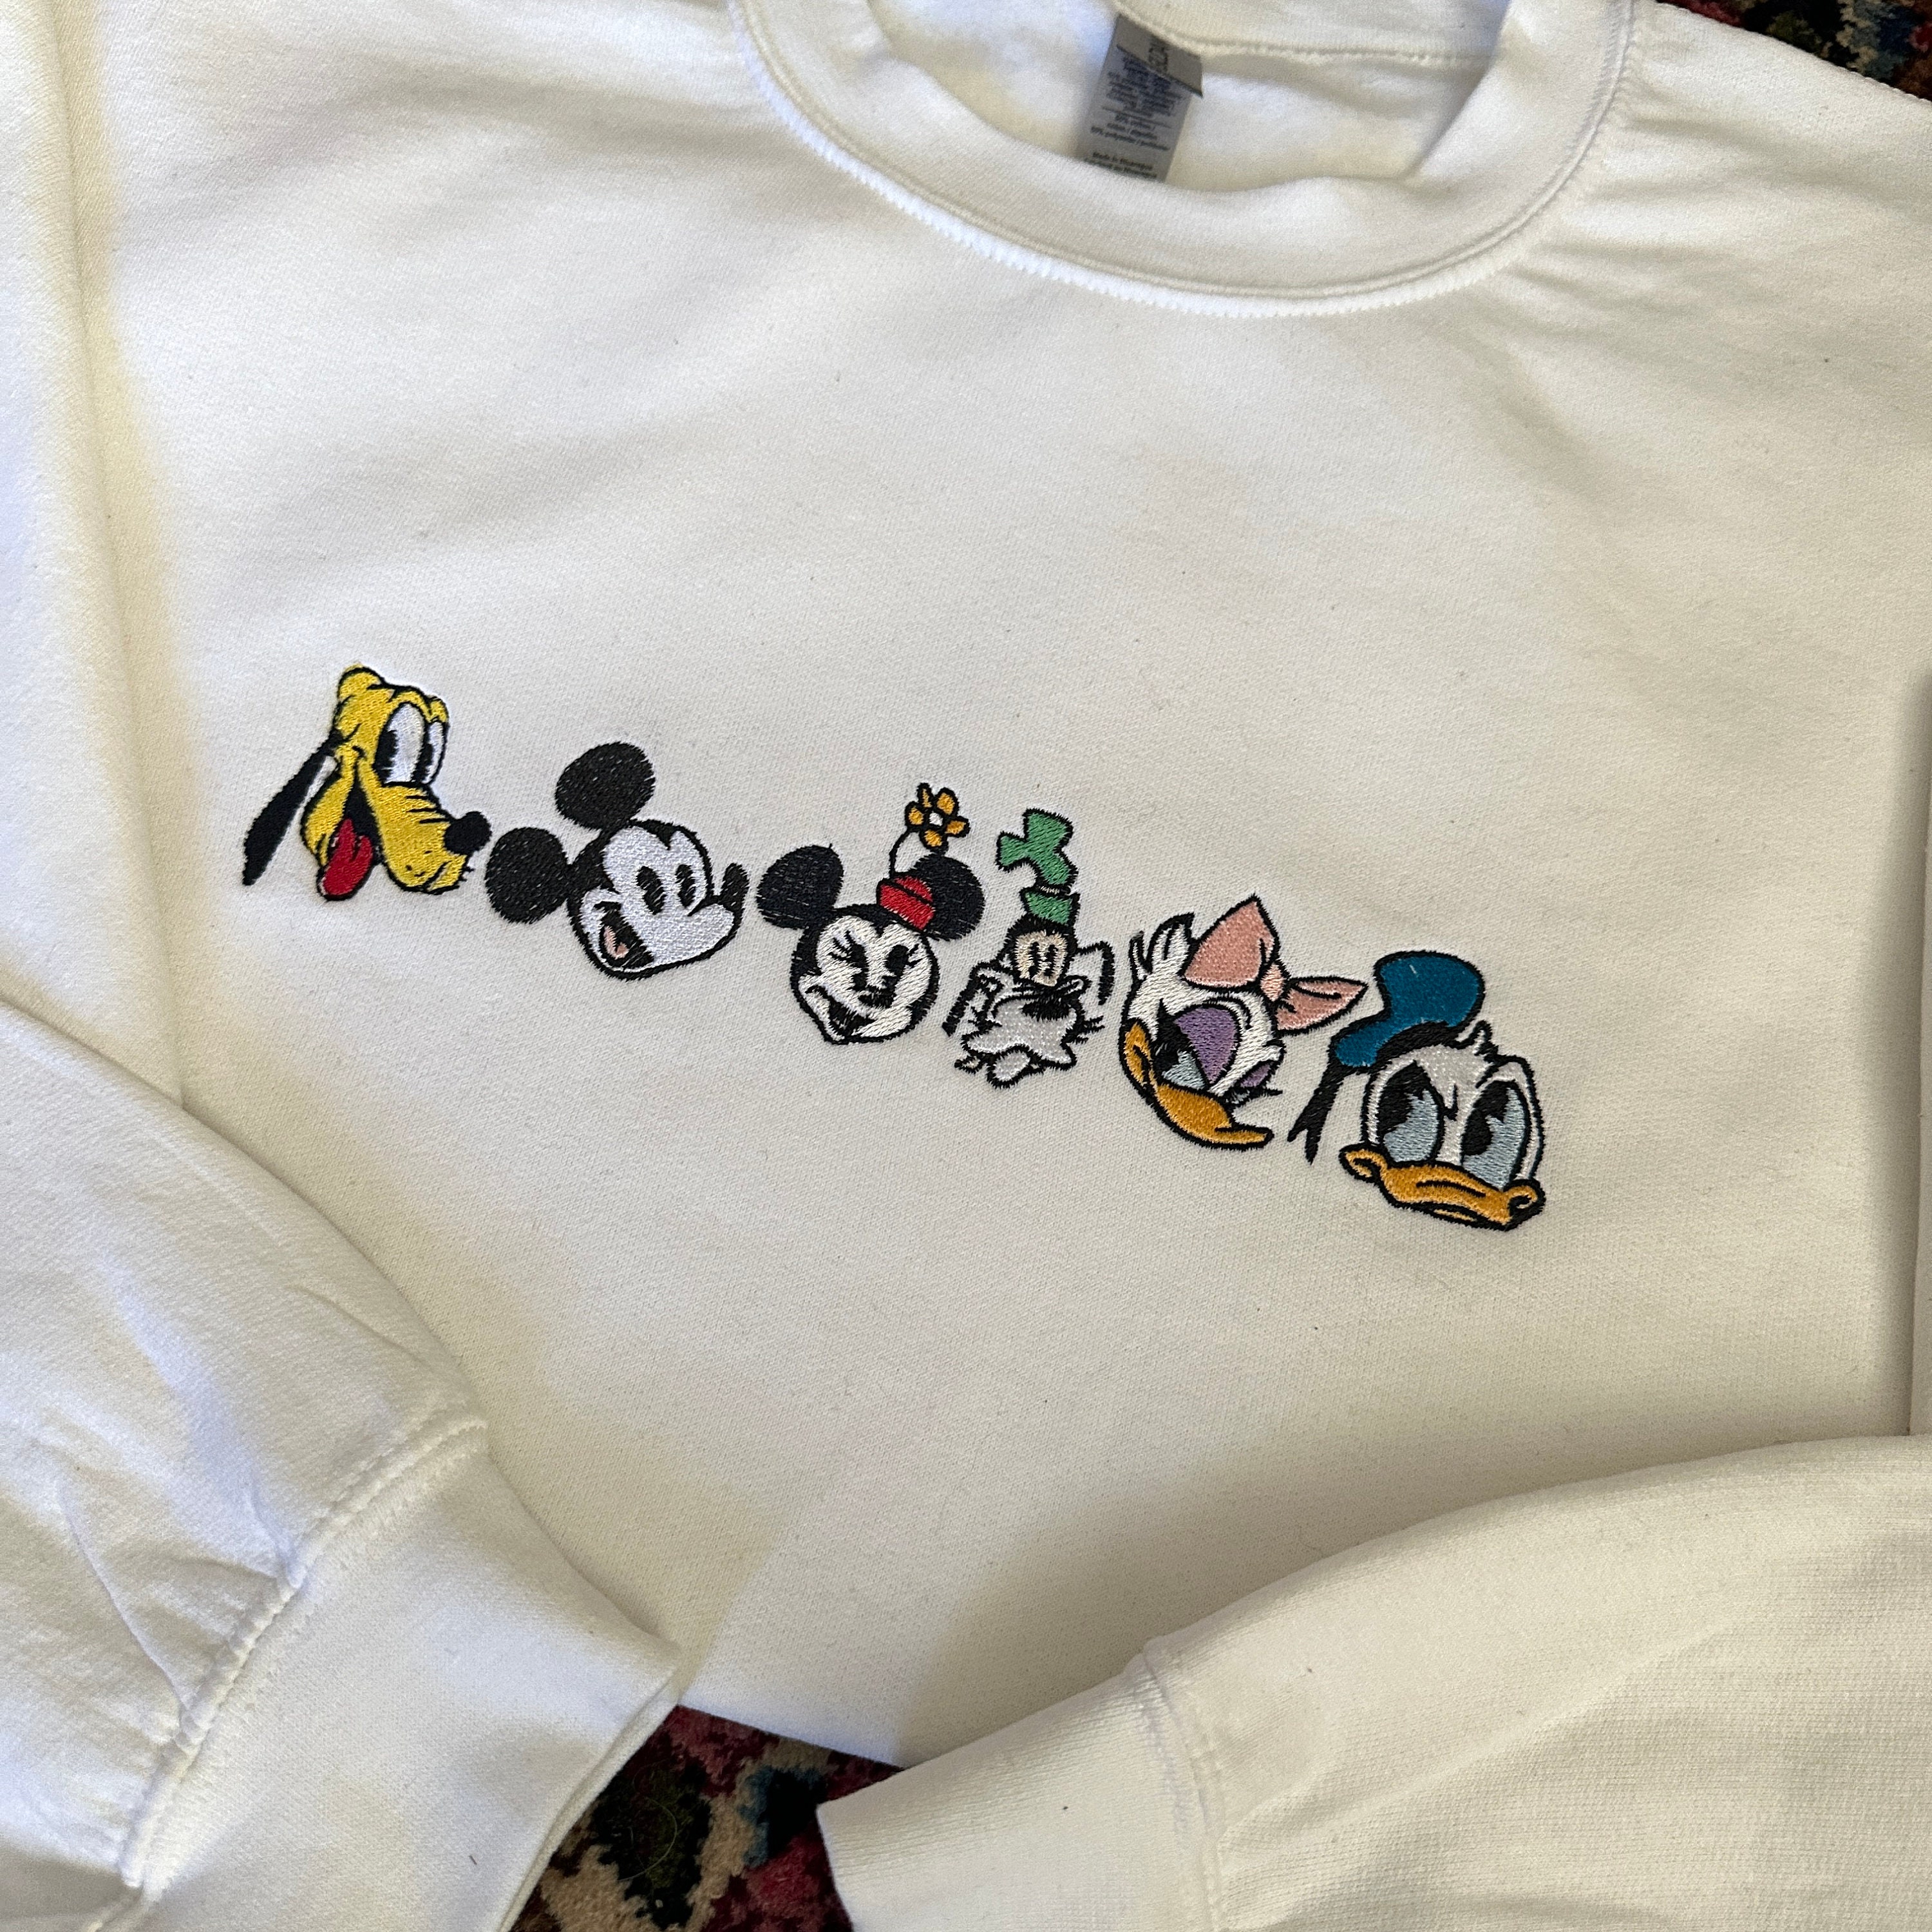 Discover Mickey and Friends Sweater - Disney Sweater - Embroidered Sweatshirt